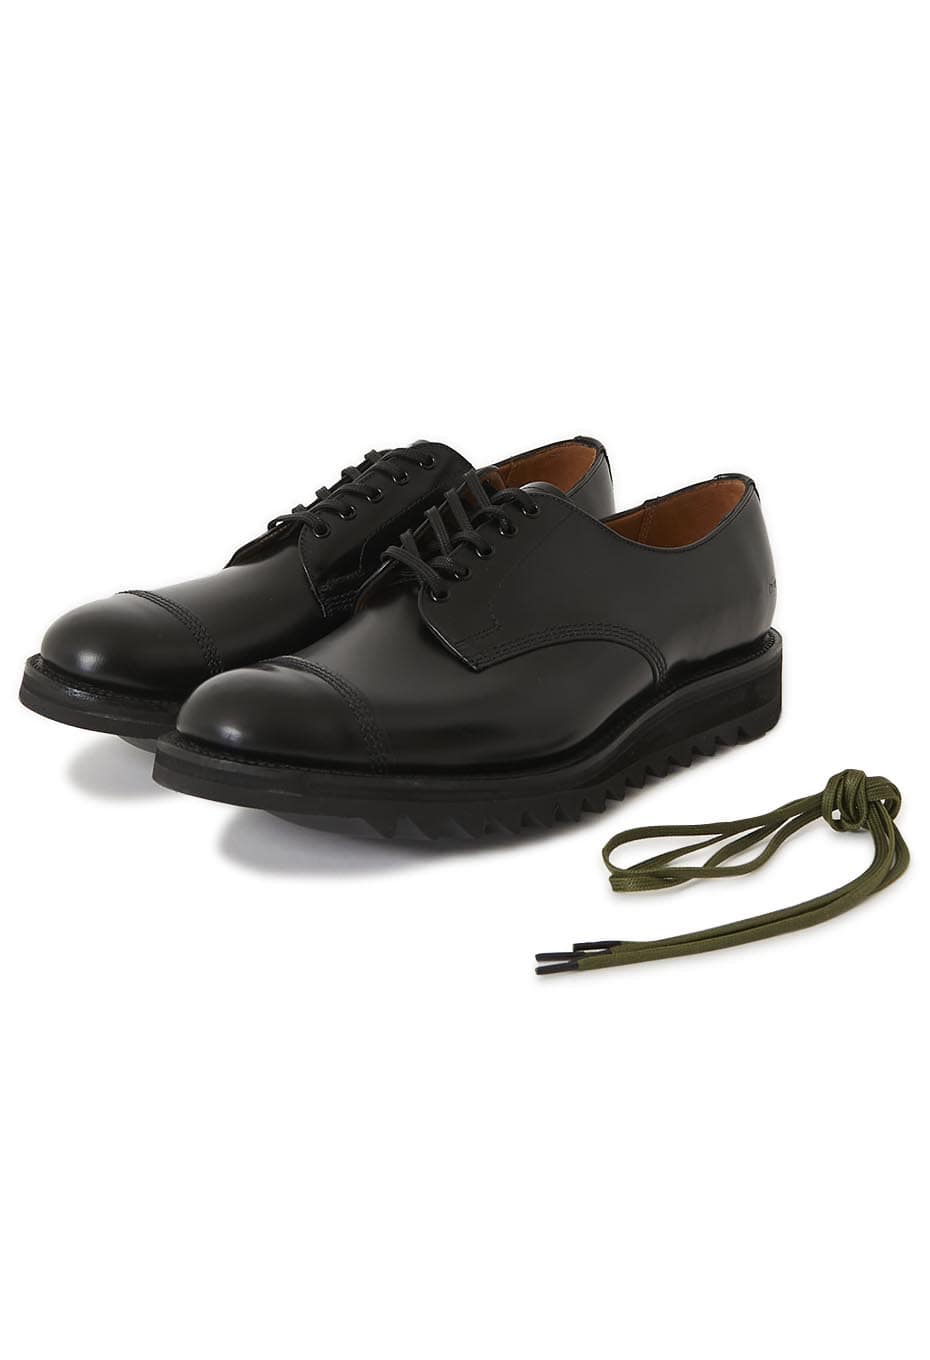 SANDERS 2934 MILITARY DERBY shoes